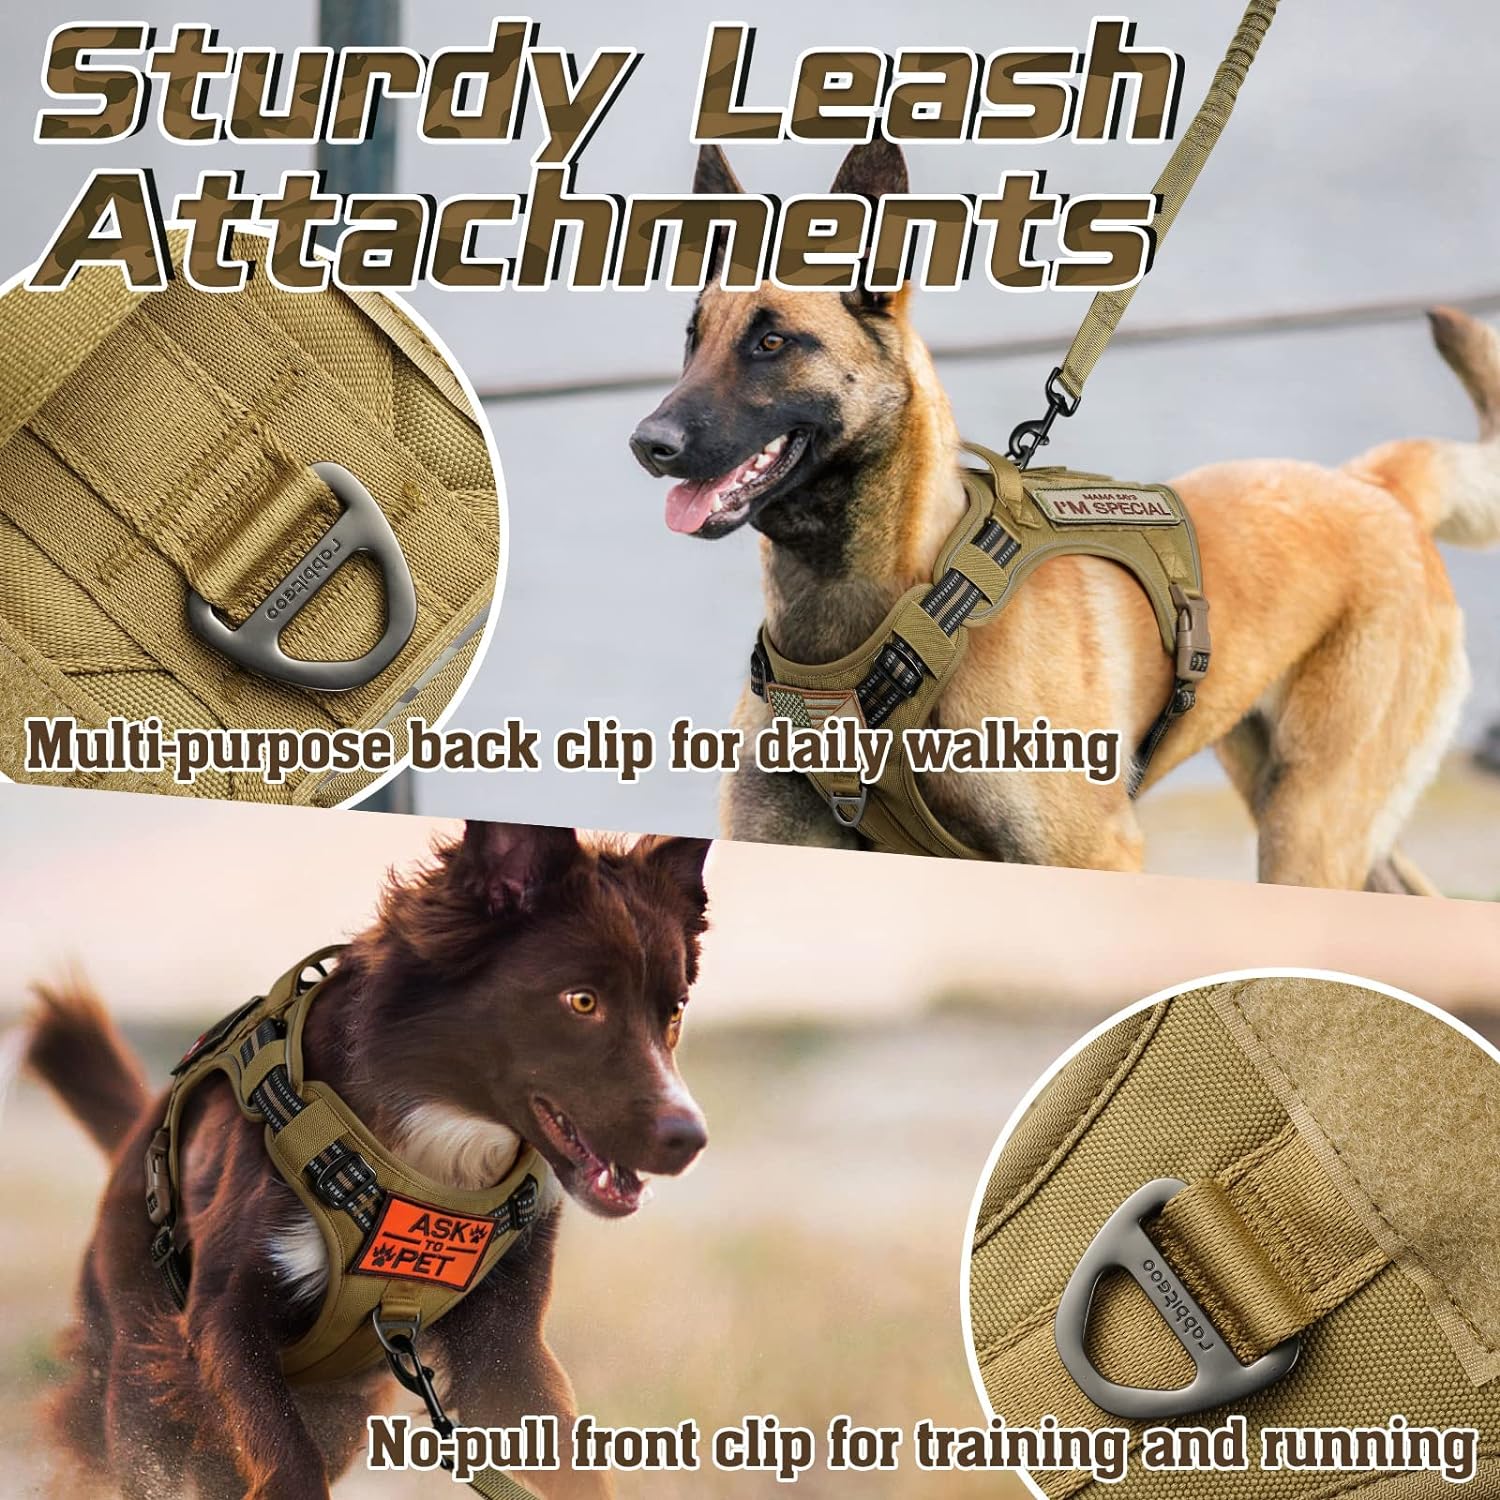 rabbitgoo Dog Harness No Pull, Military Dog Harness Medium Sized Dog with Handle Molle, Easy Control Service Dog Vest Harness Training Walking, Adjustable Reflective Tactical Pet Harness, Brown, M